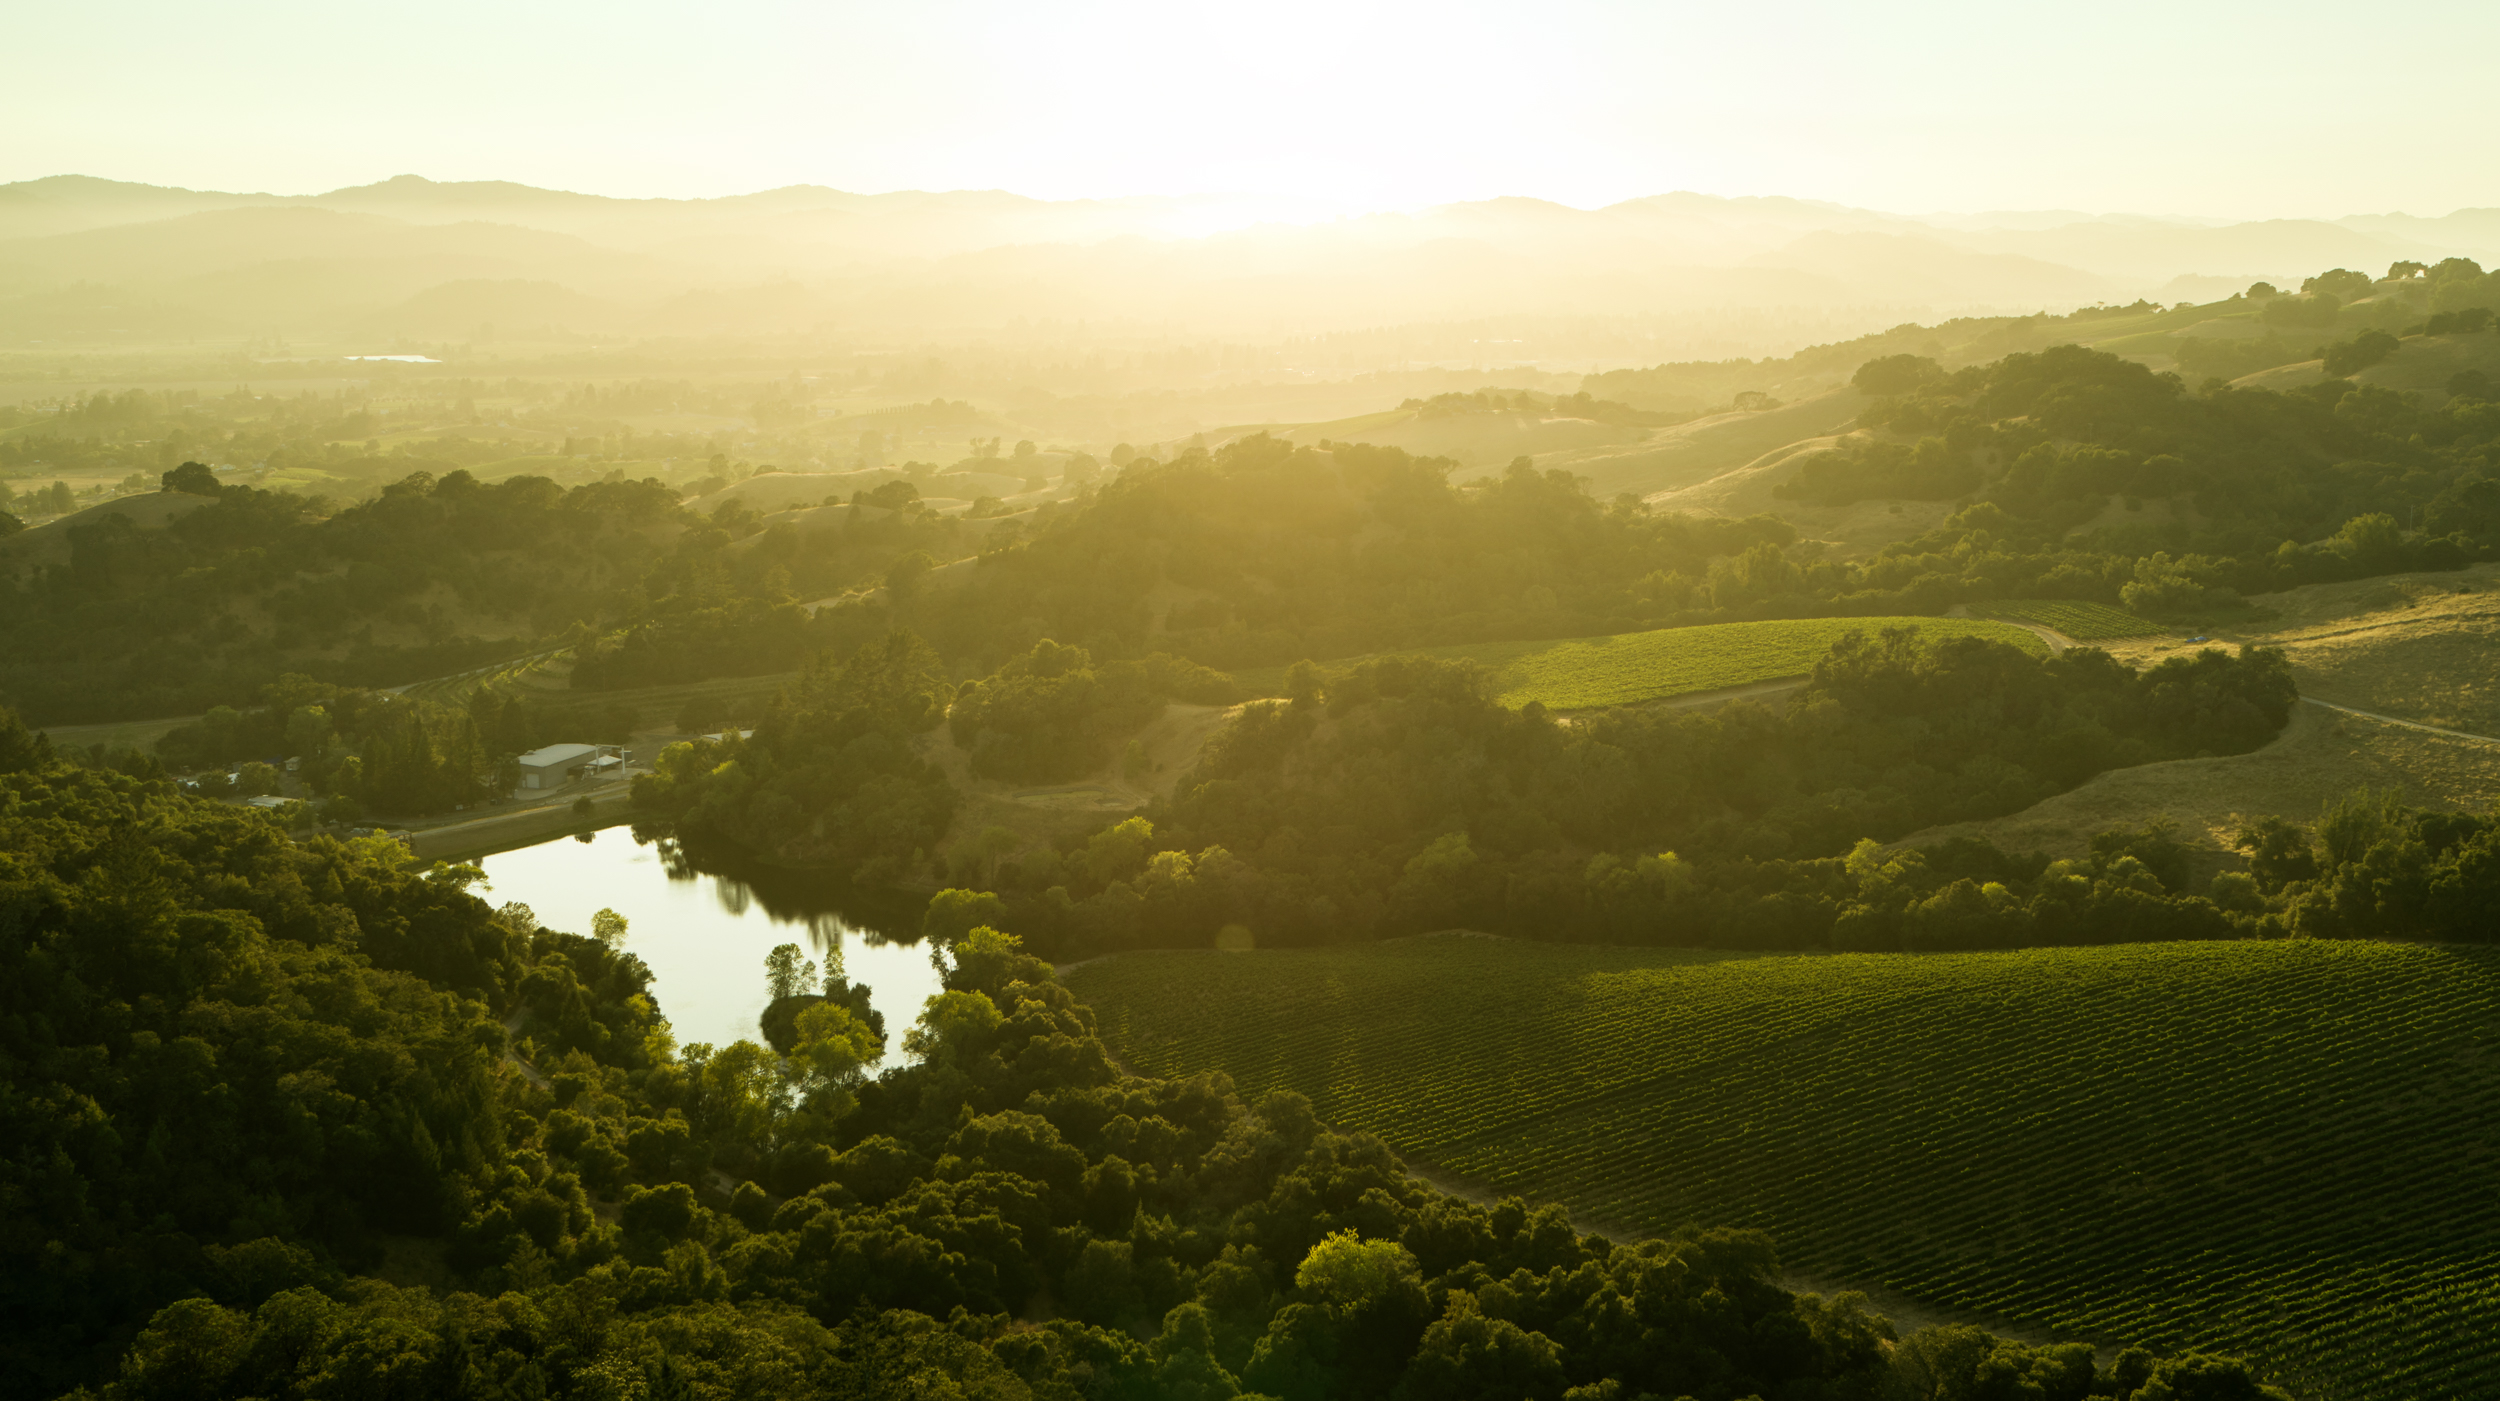 Tucked in hillsides and valleys along the Russian River, the area is defined by the foggy mornings and warm afternoons that are ideal for Pinot Noir, Chardonnay, and more.